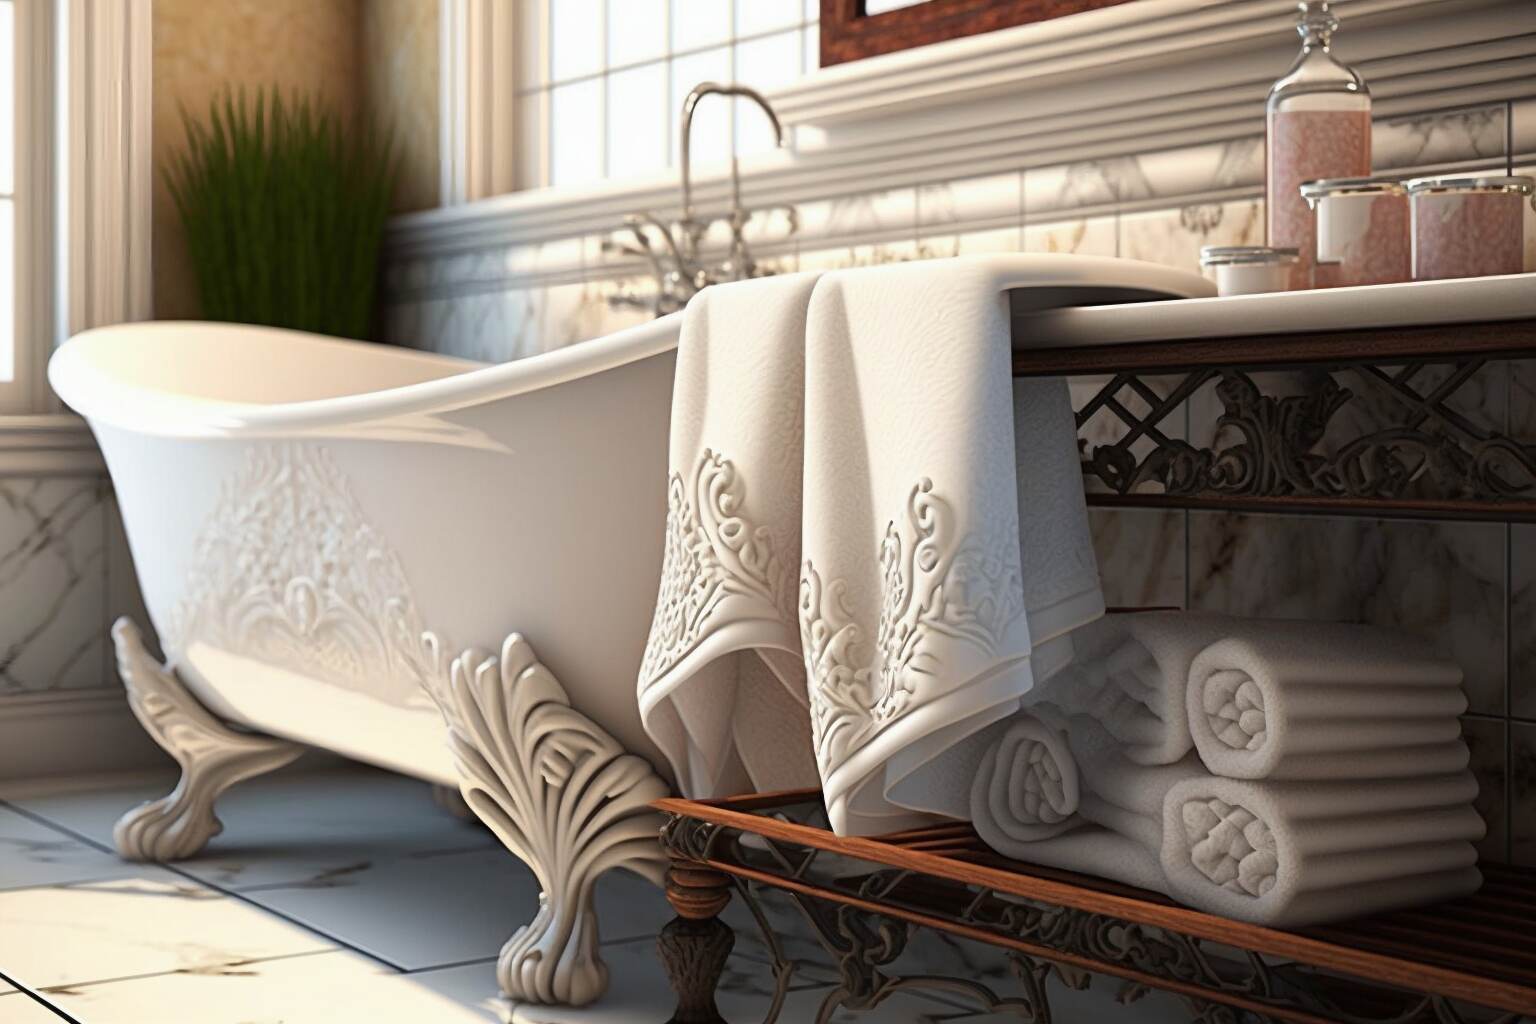 Traditional Bathroom With An Ornate Clawfoot Tub And Marble Counters